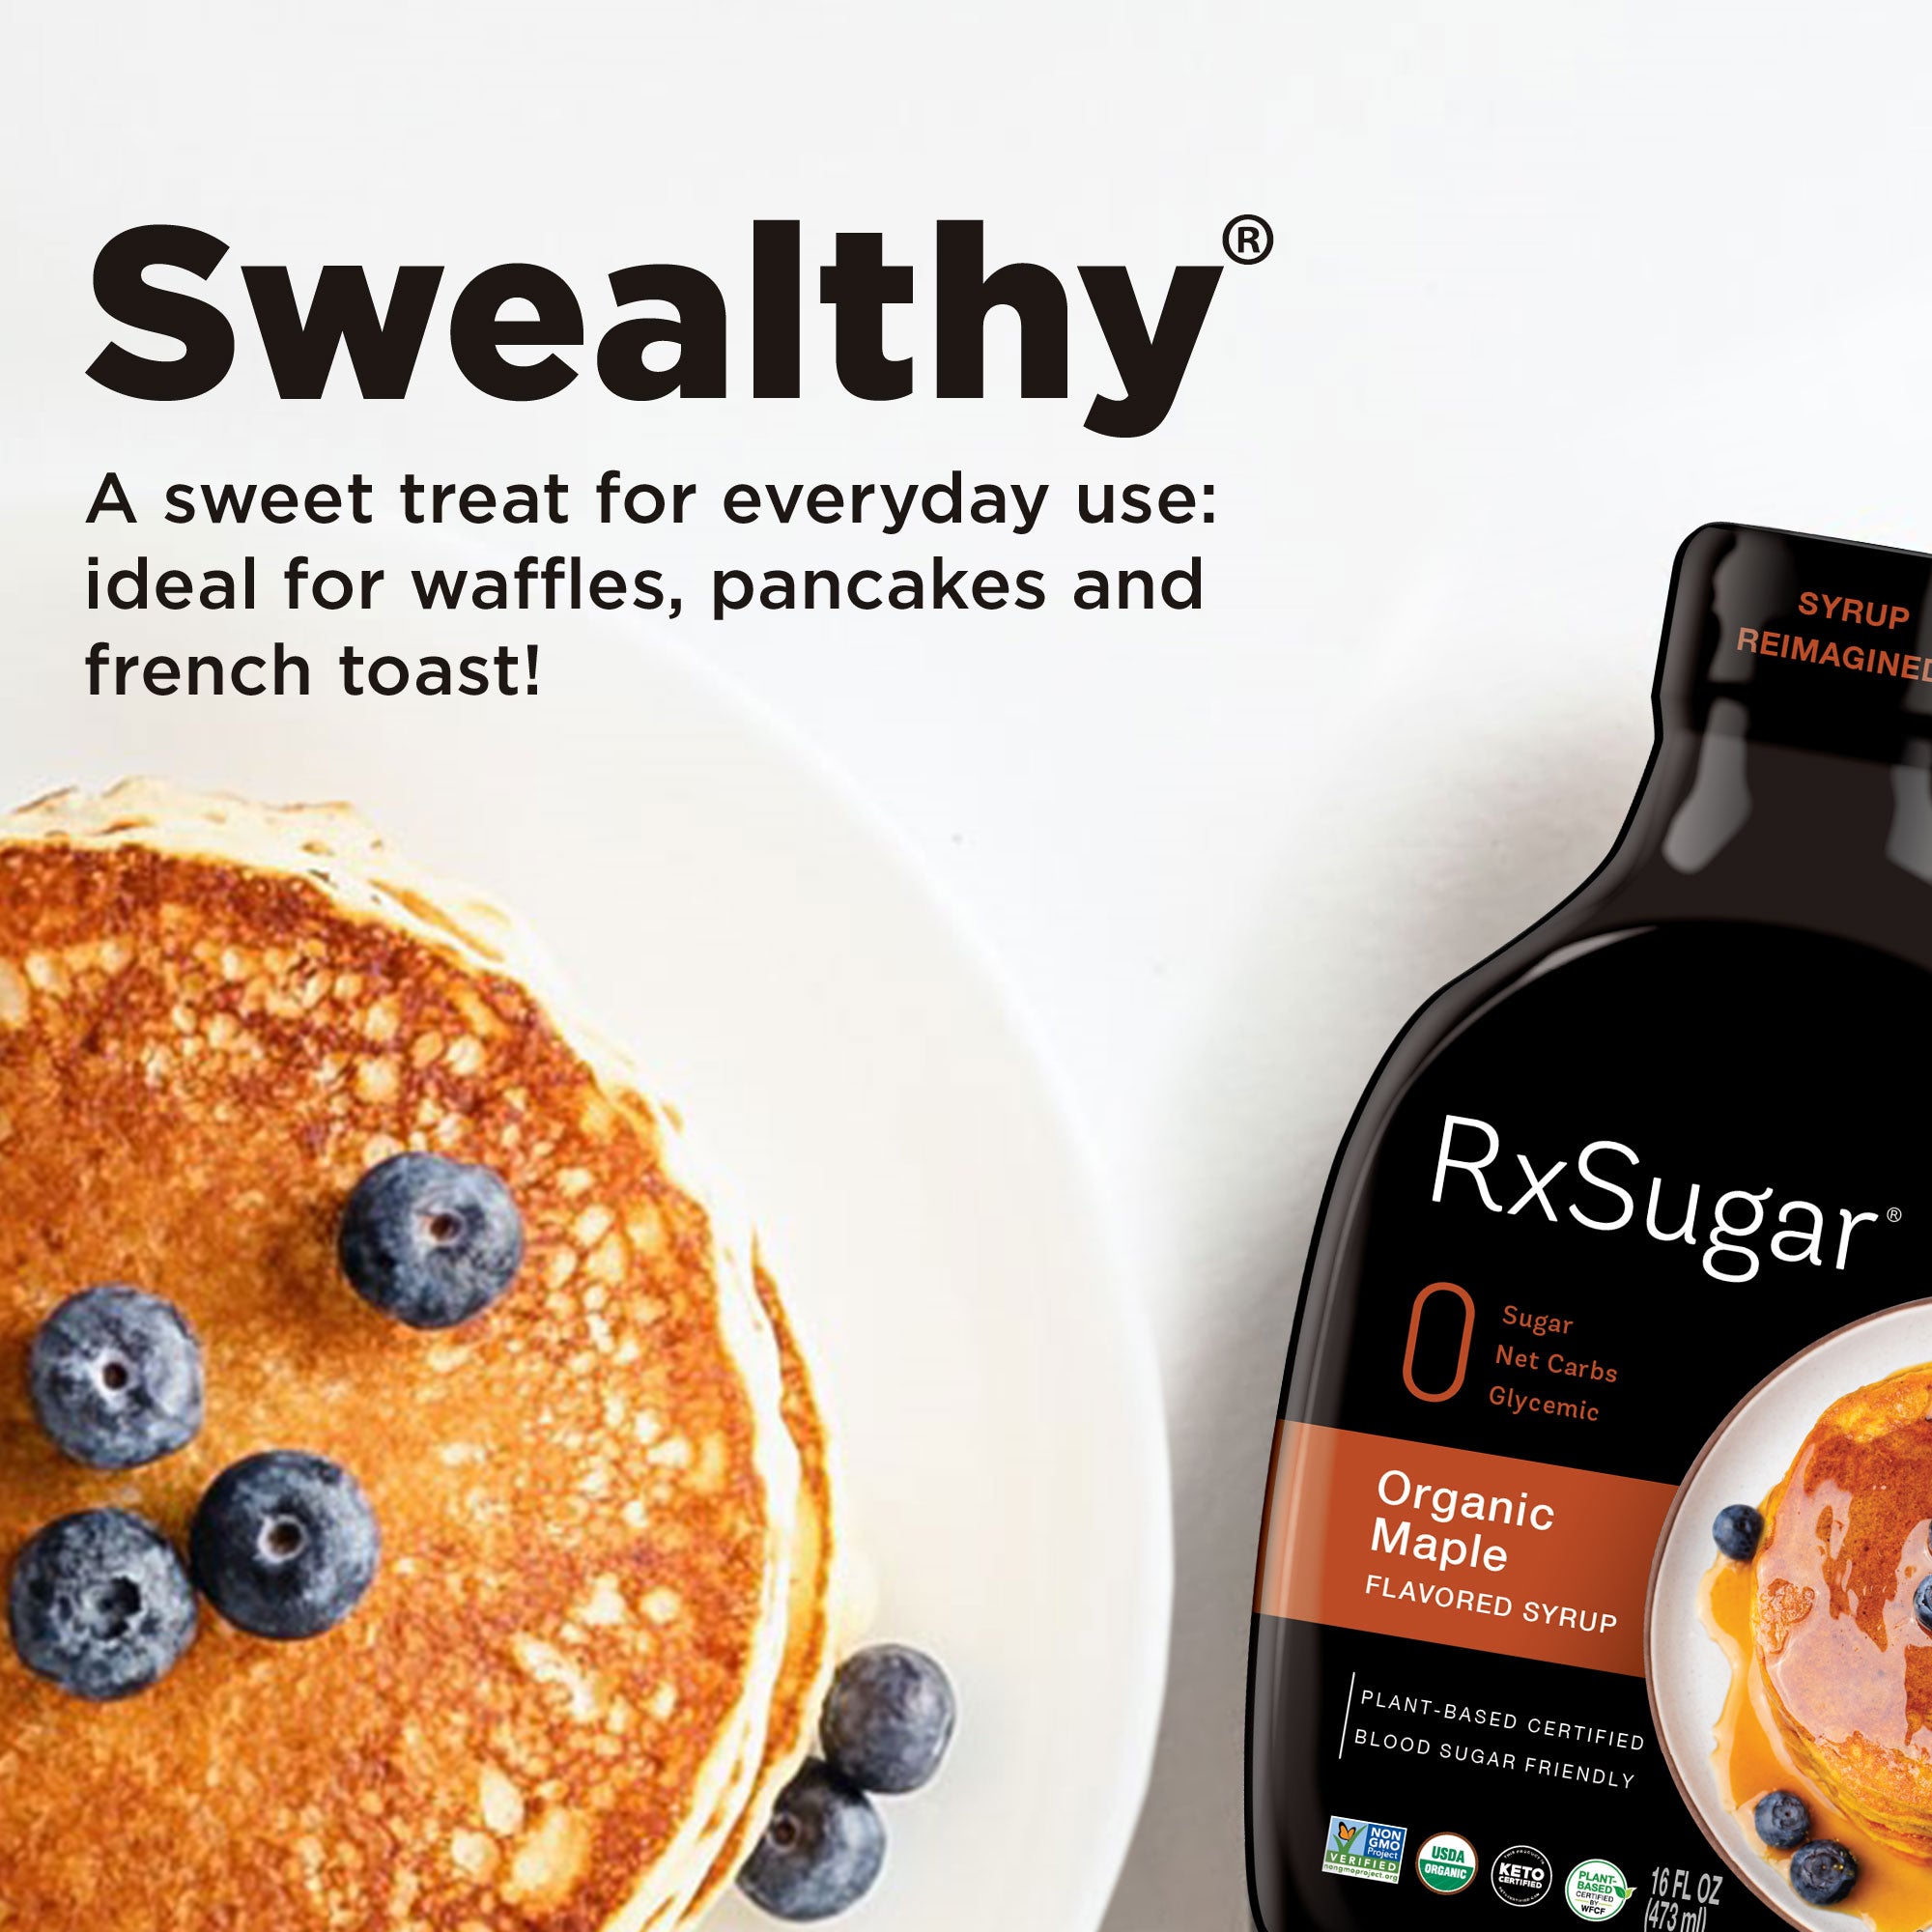 Swealthy - A sweet trat for everyday use: ideal for waffles, pancakes and french toast. Photo of pancakes and RxSugar Maple Syrup